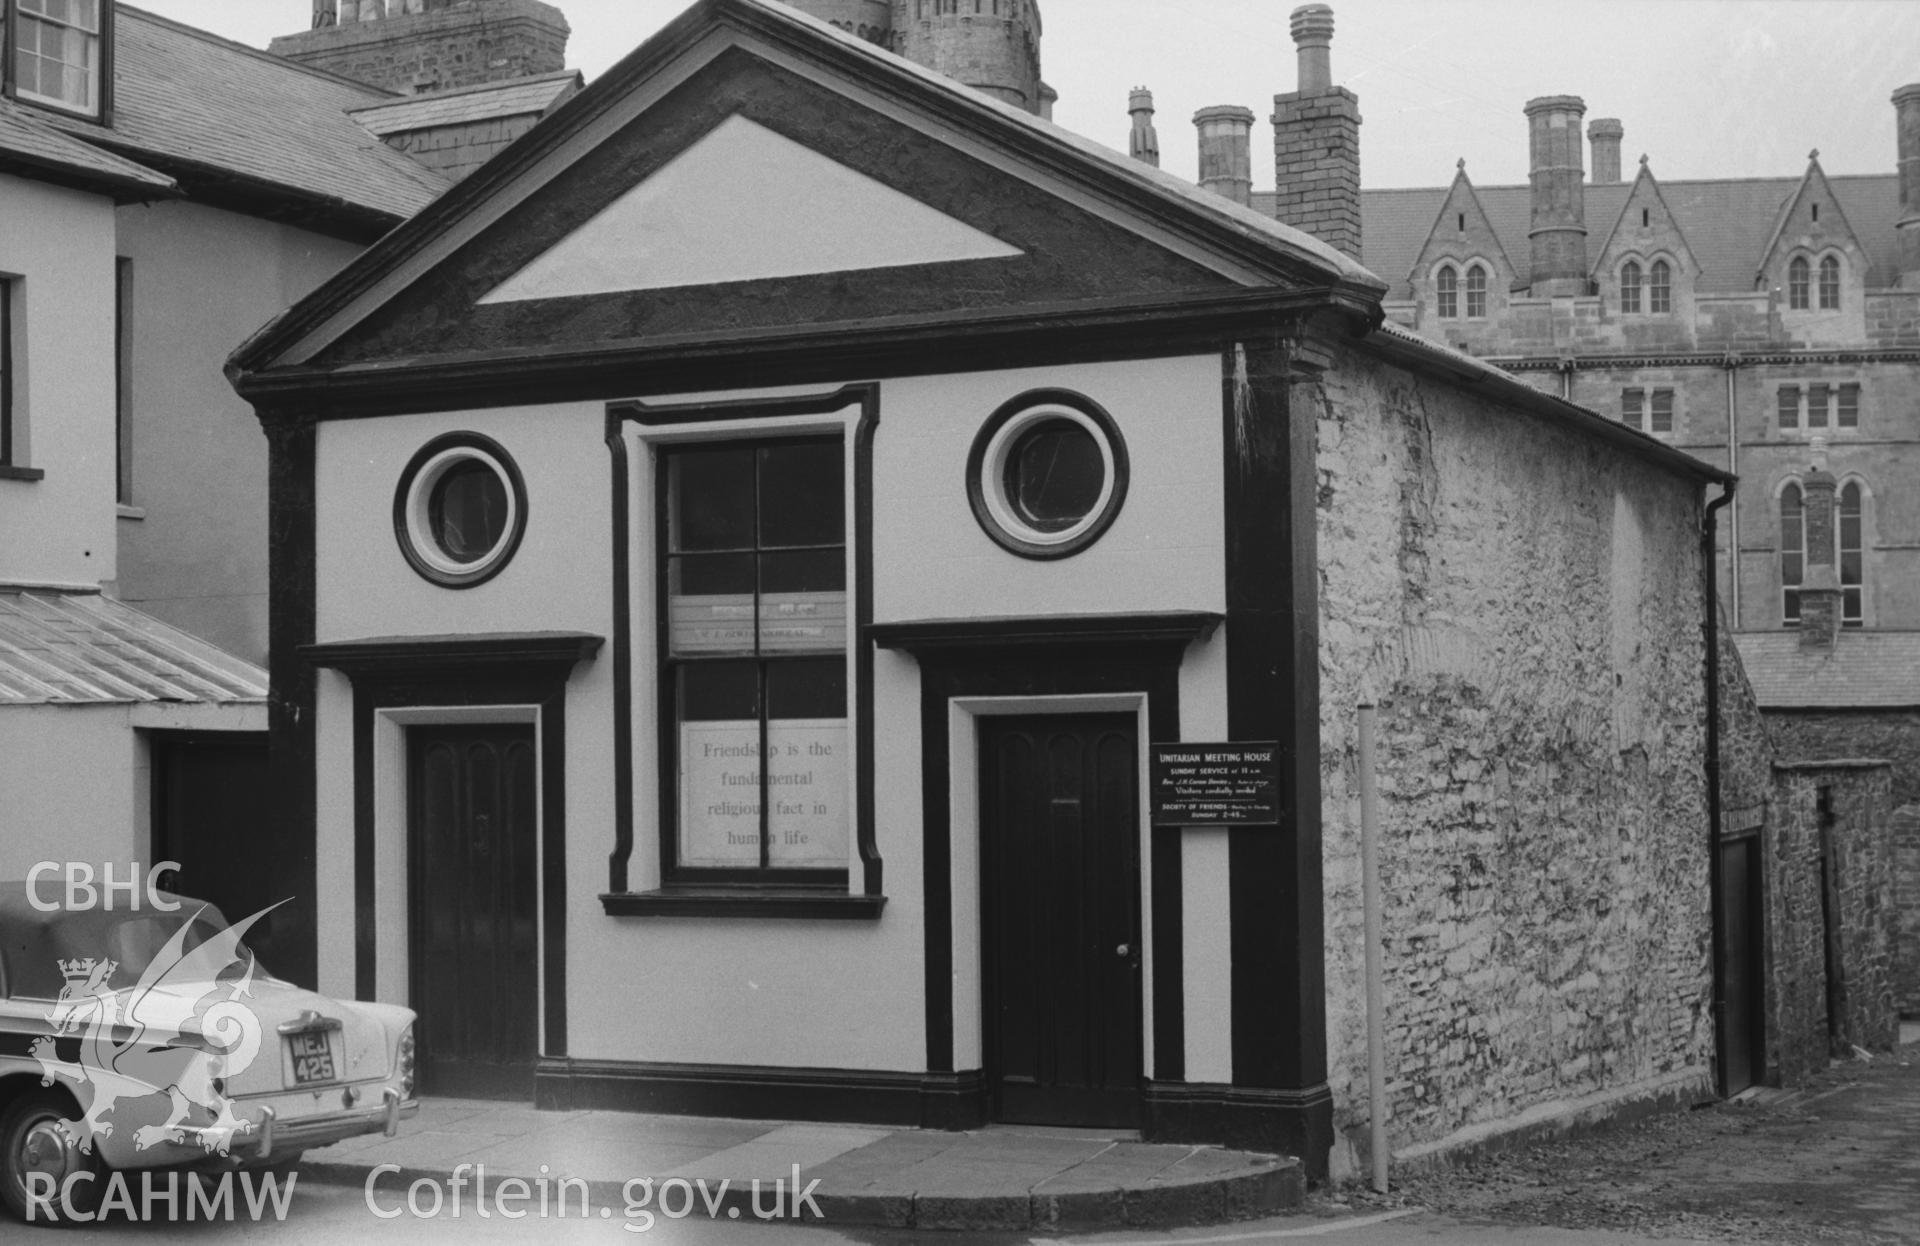 Digital copy of a black and white negative showing exterior view of The Unitarian Chapel on New Street, Aberystwyth. Photographed by Arthur O. Chater on 15th August 1967, looking north west from Grid Reference SN 581 817.